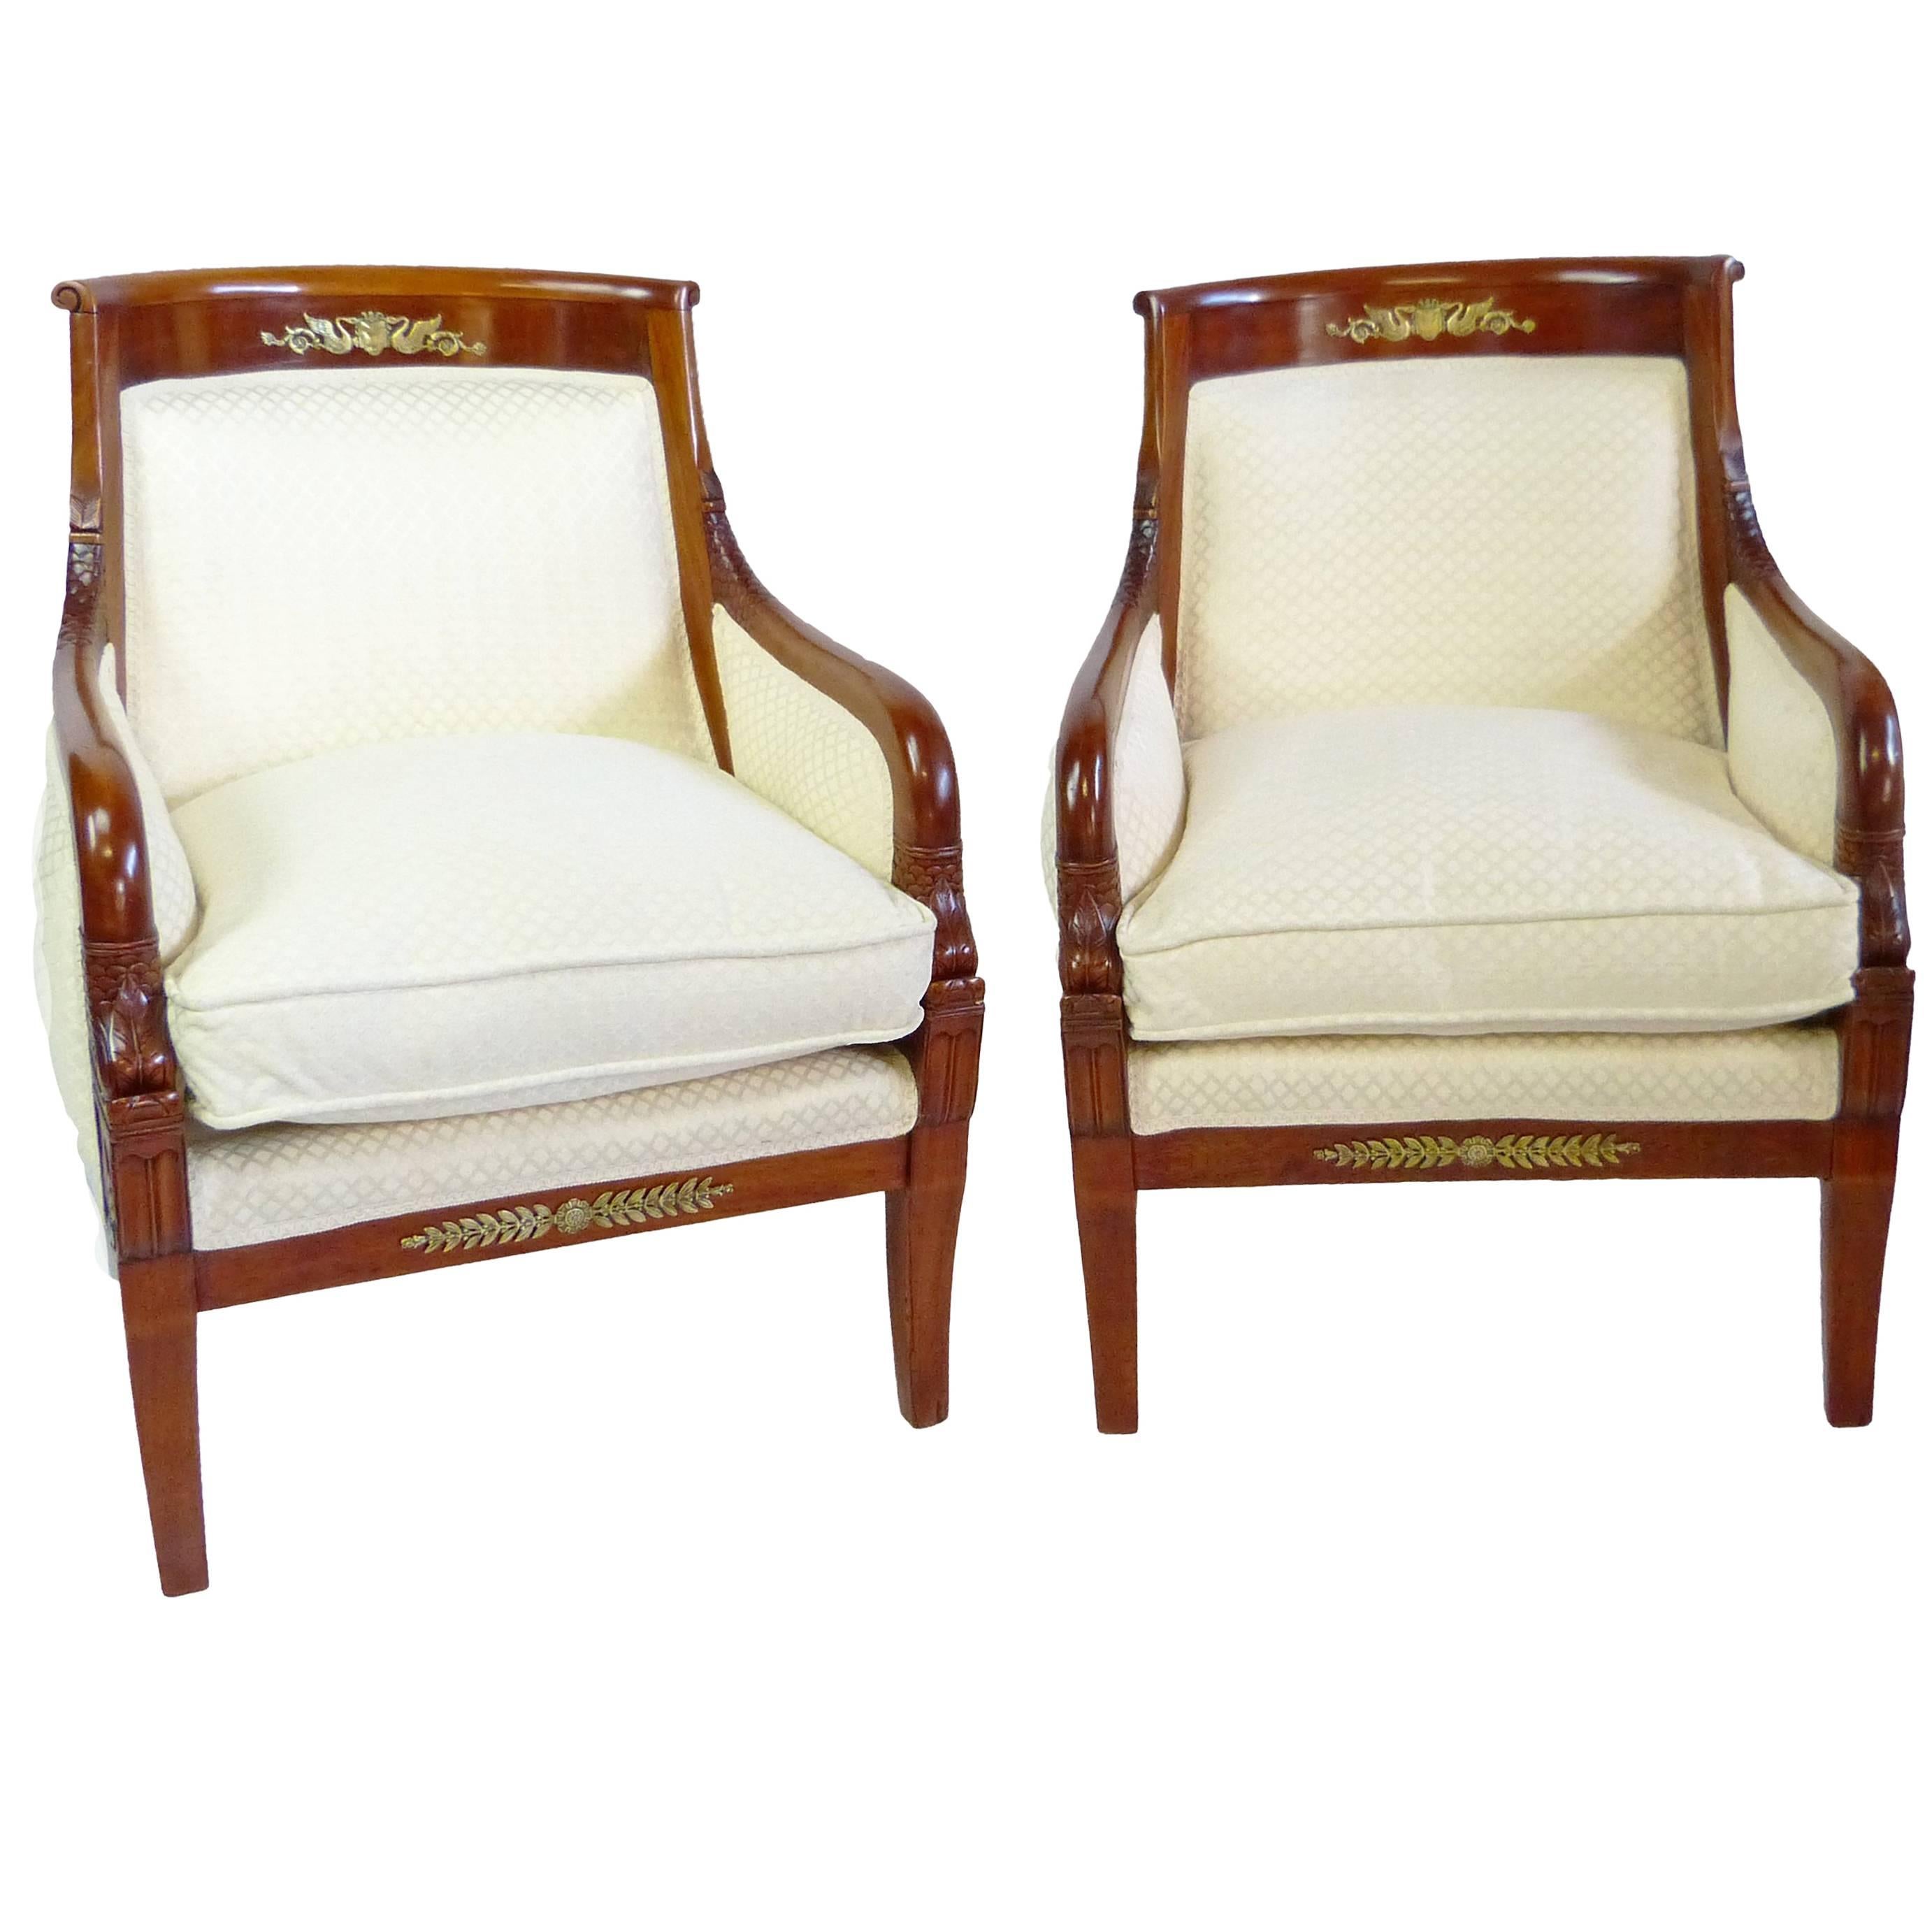 Empire Dolphin Armchairs 19th Century French with Gilt Brass Decorations